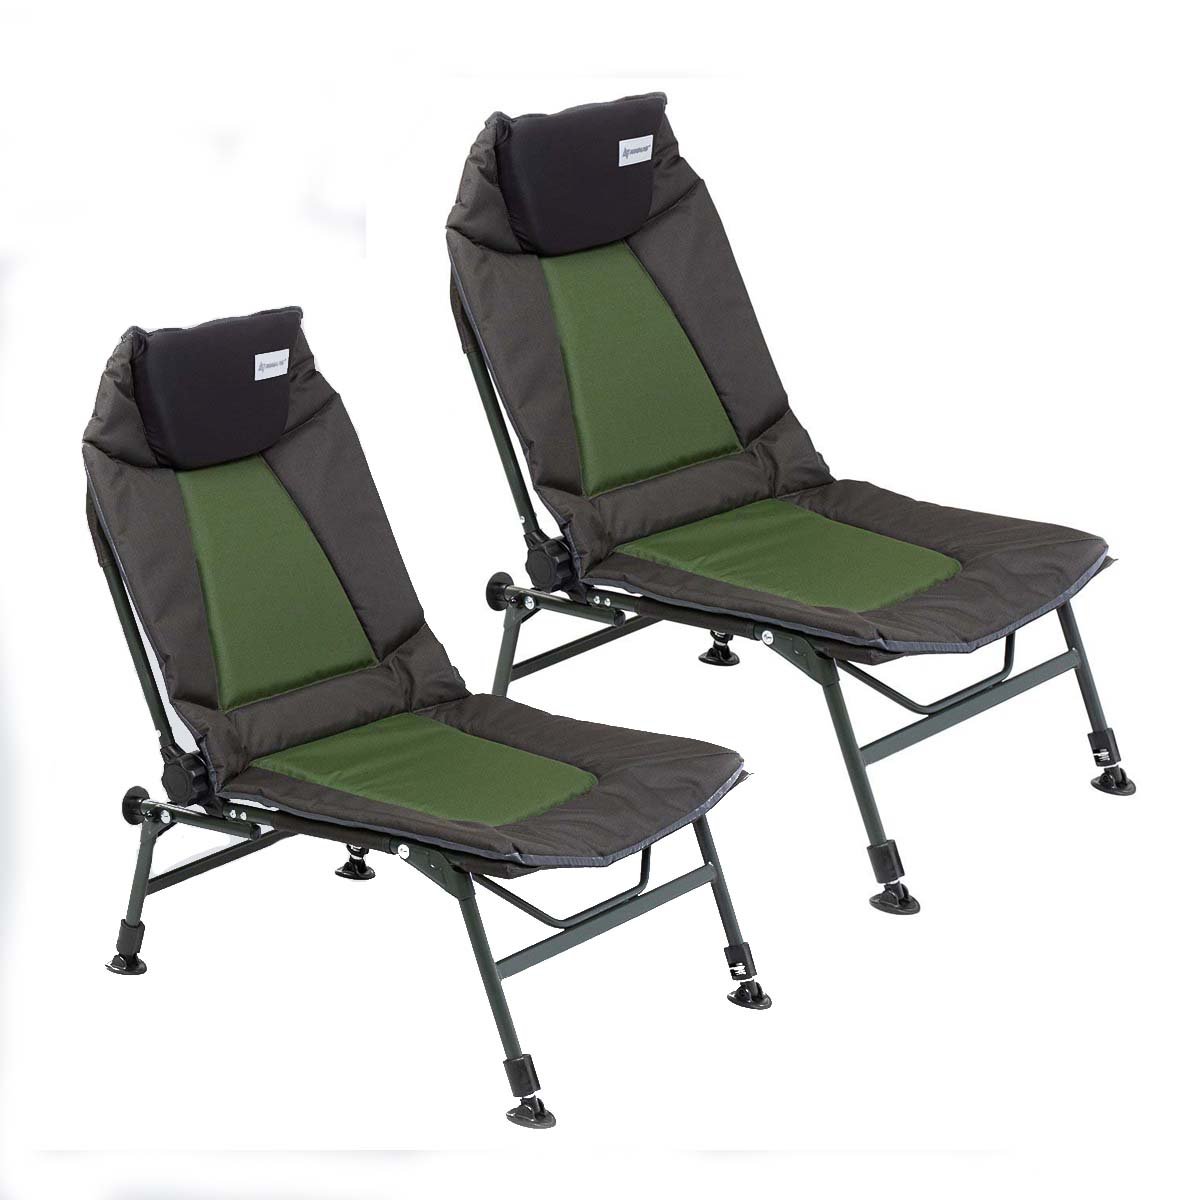 Set of 2 of Reclining Camping Lounger Chair for Outdoor